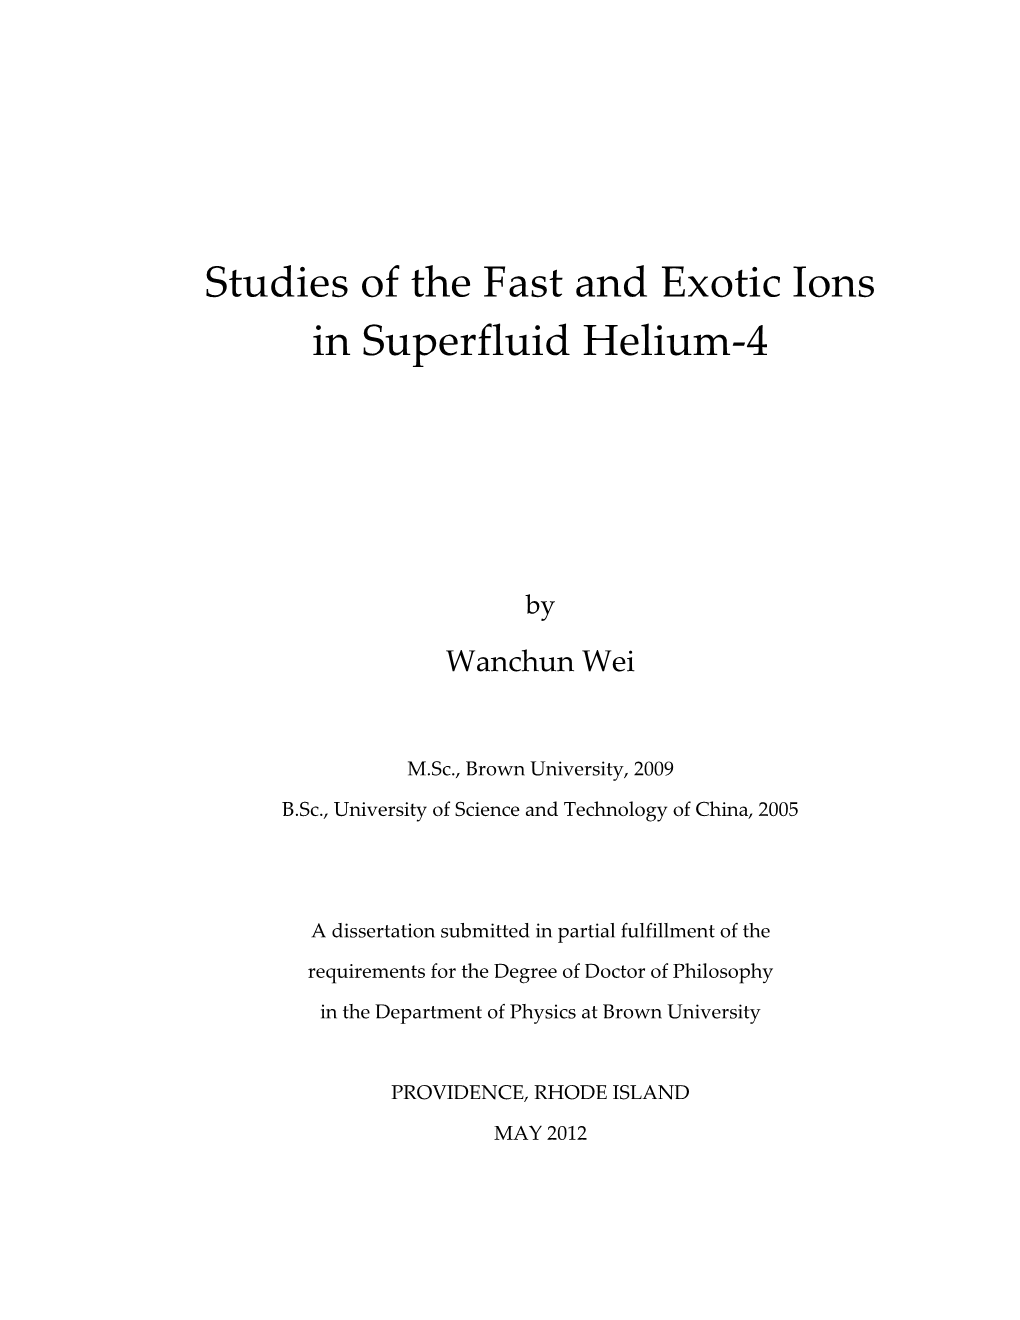 Studies of the Fast and Exotic Ions in Superfluid Helium-4